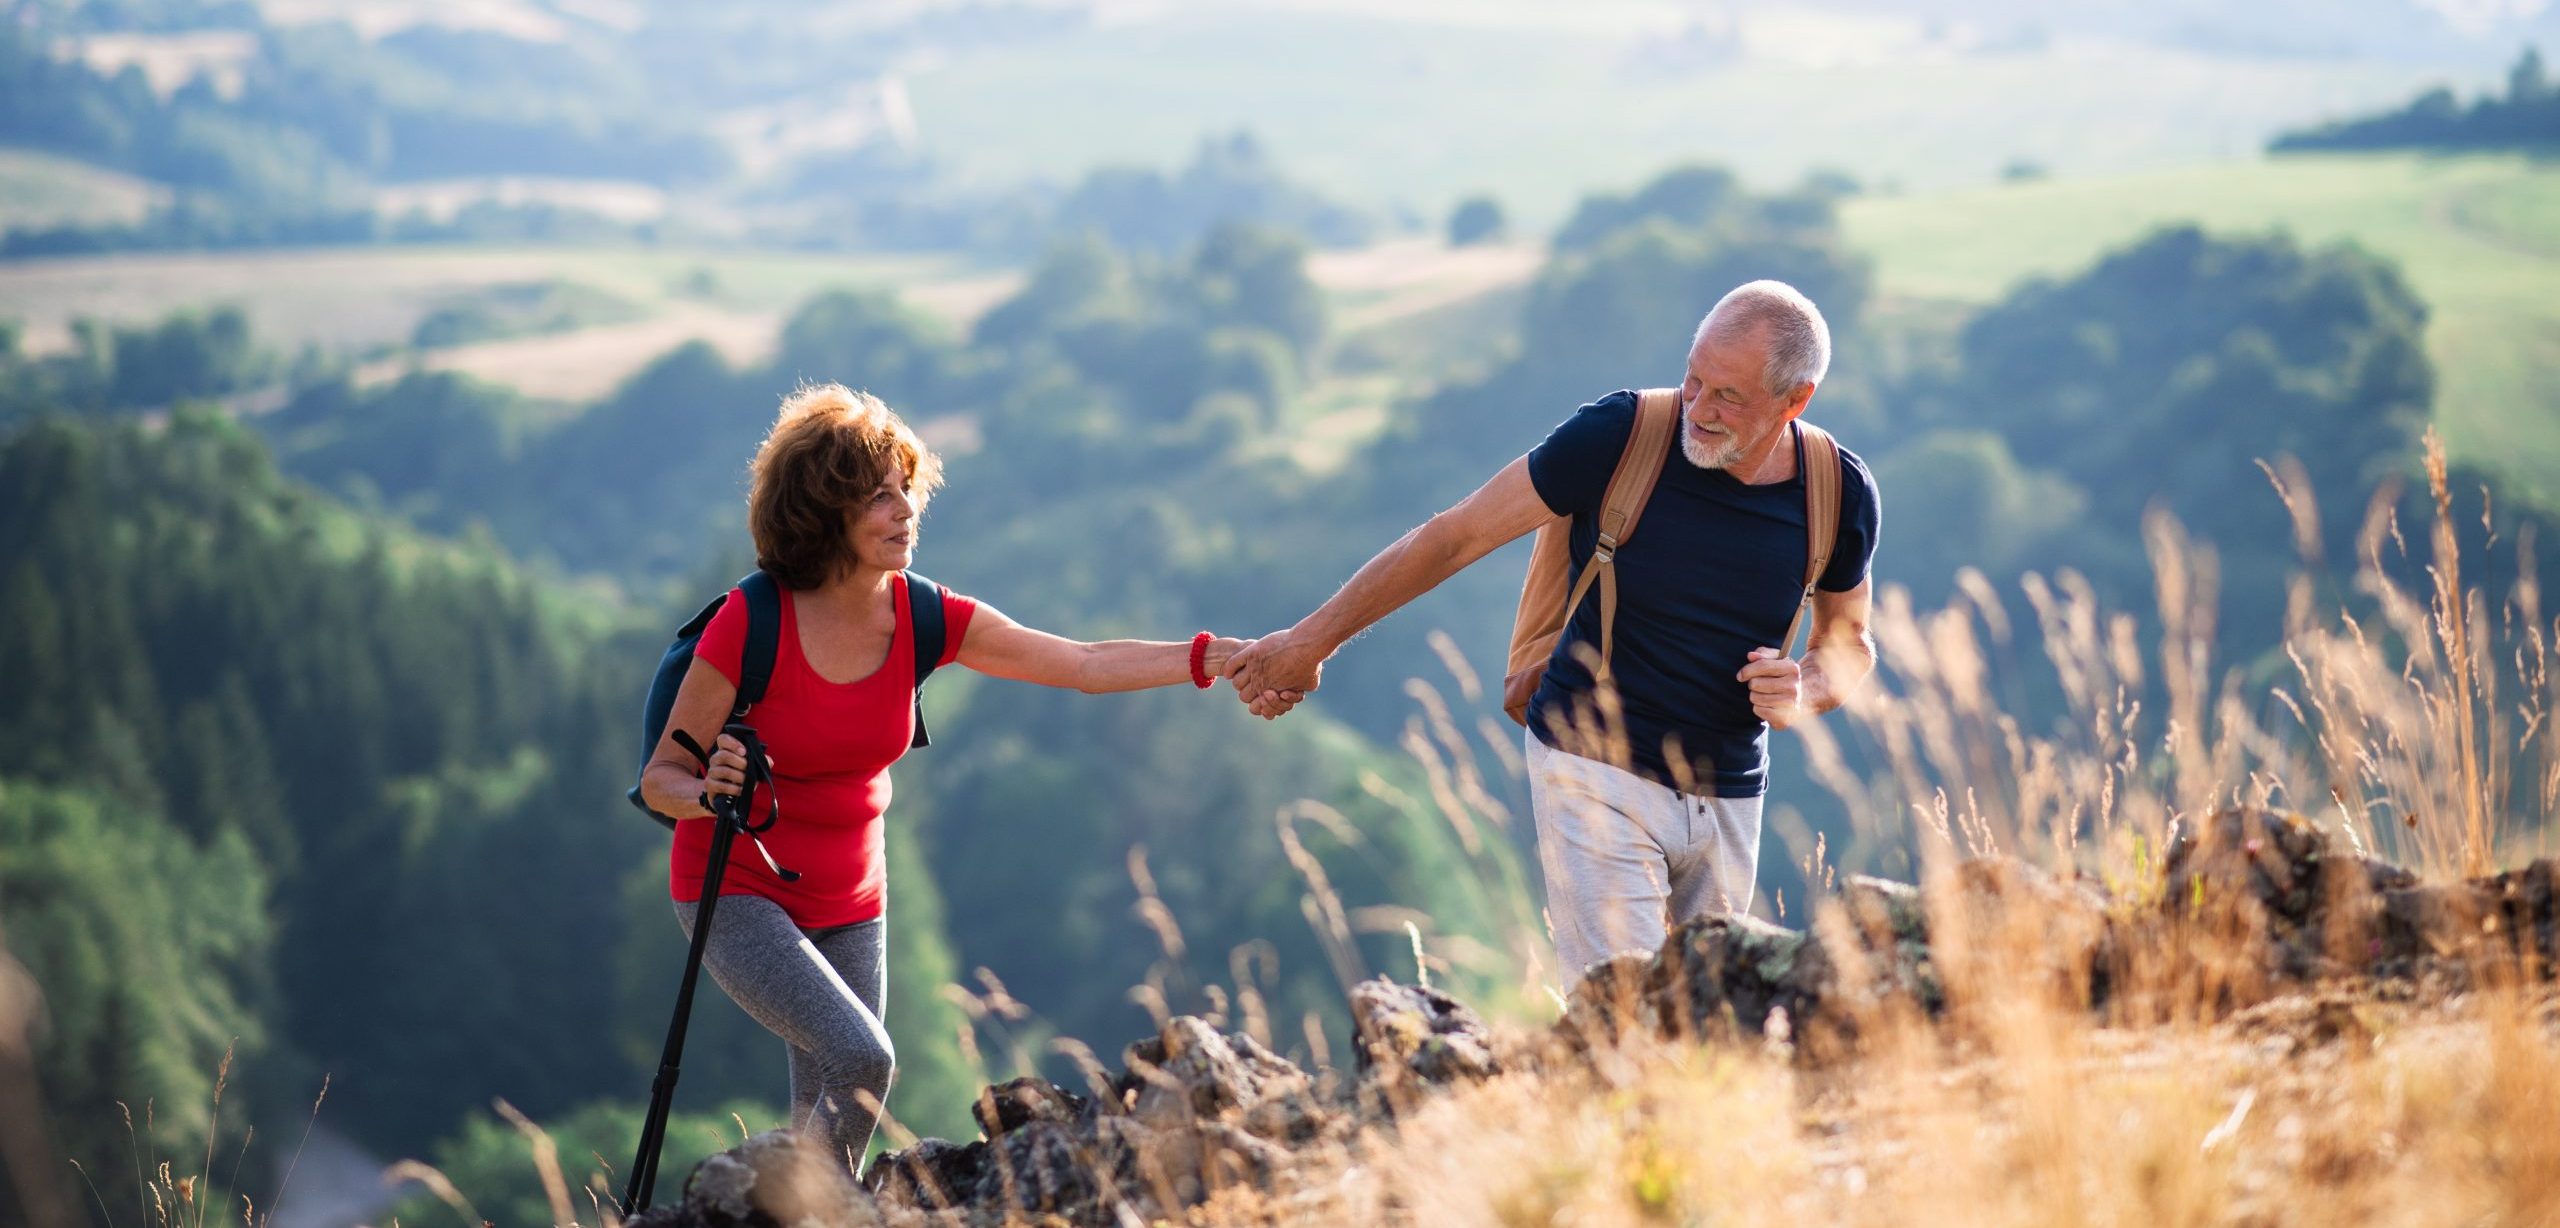 Senior tourist couple with backpacks hiking in nature, holding hands.